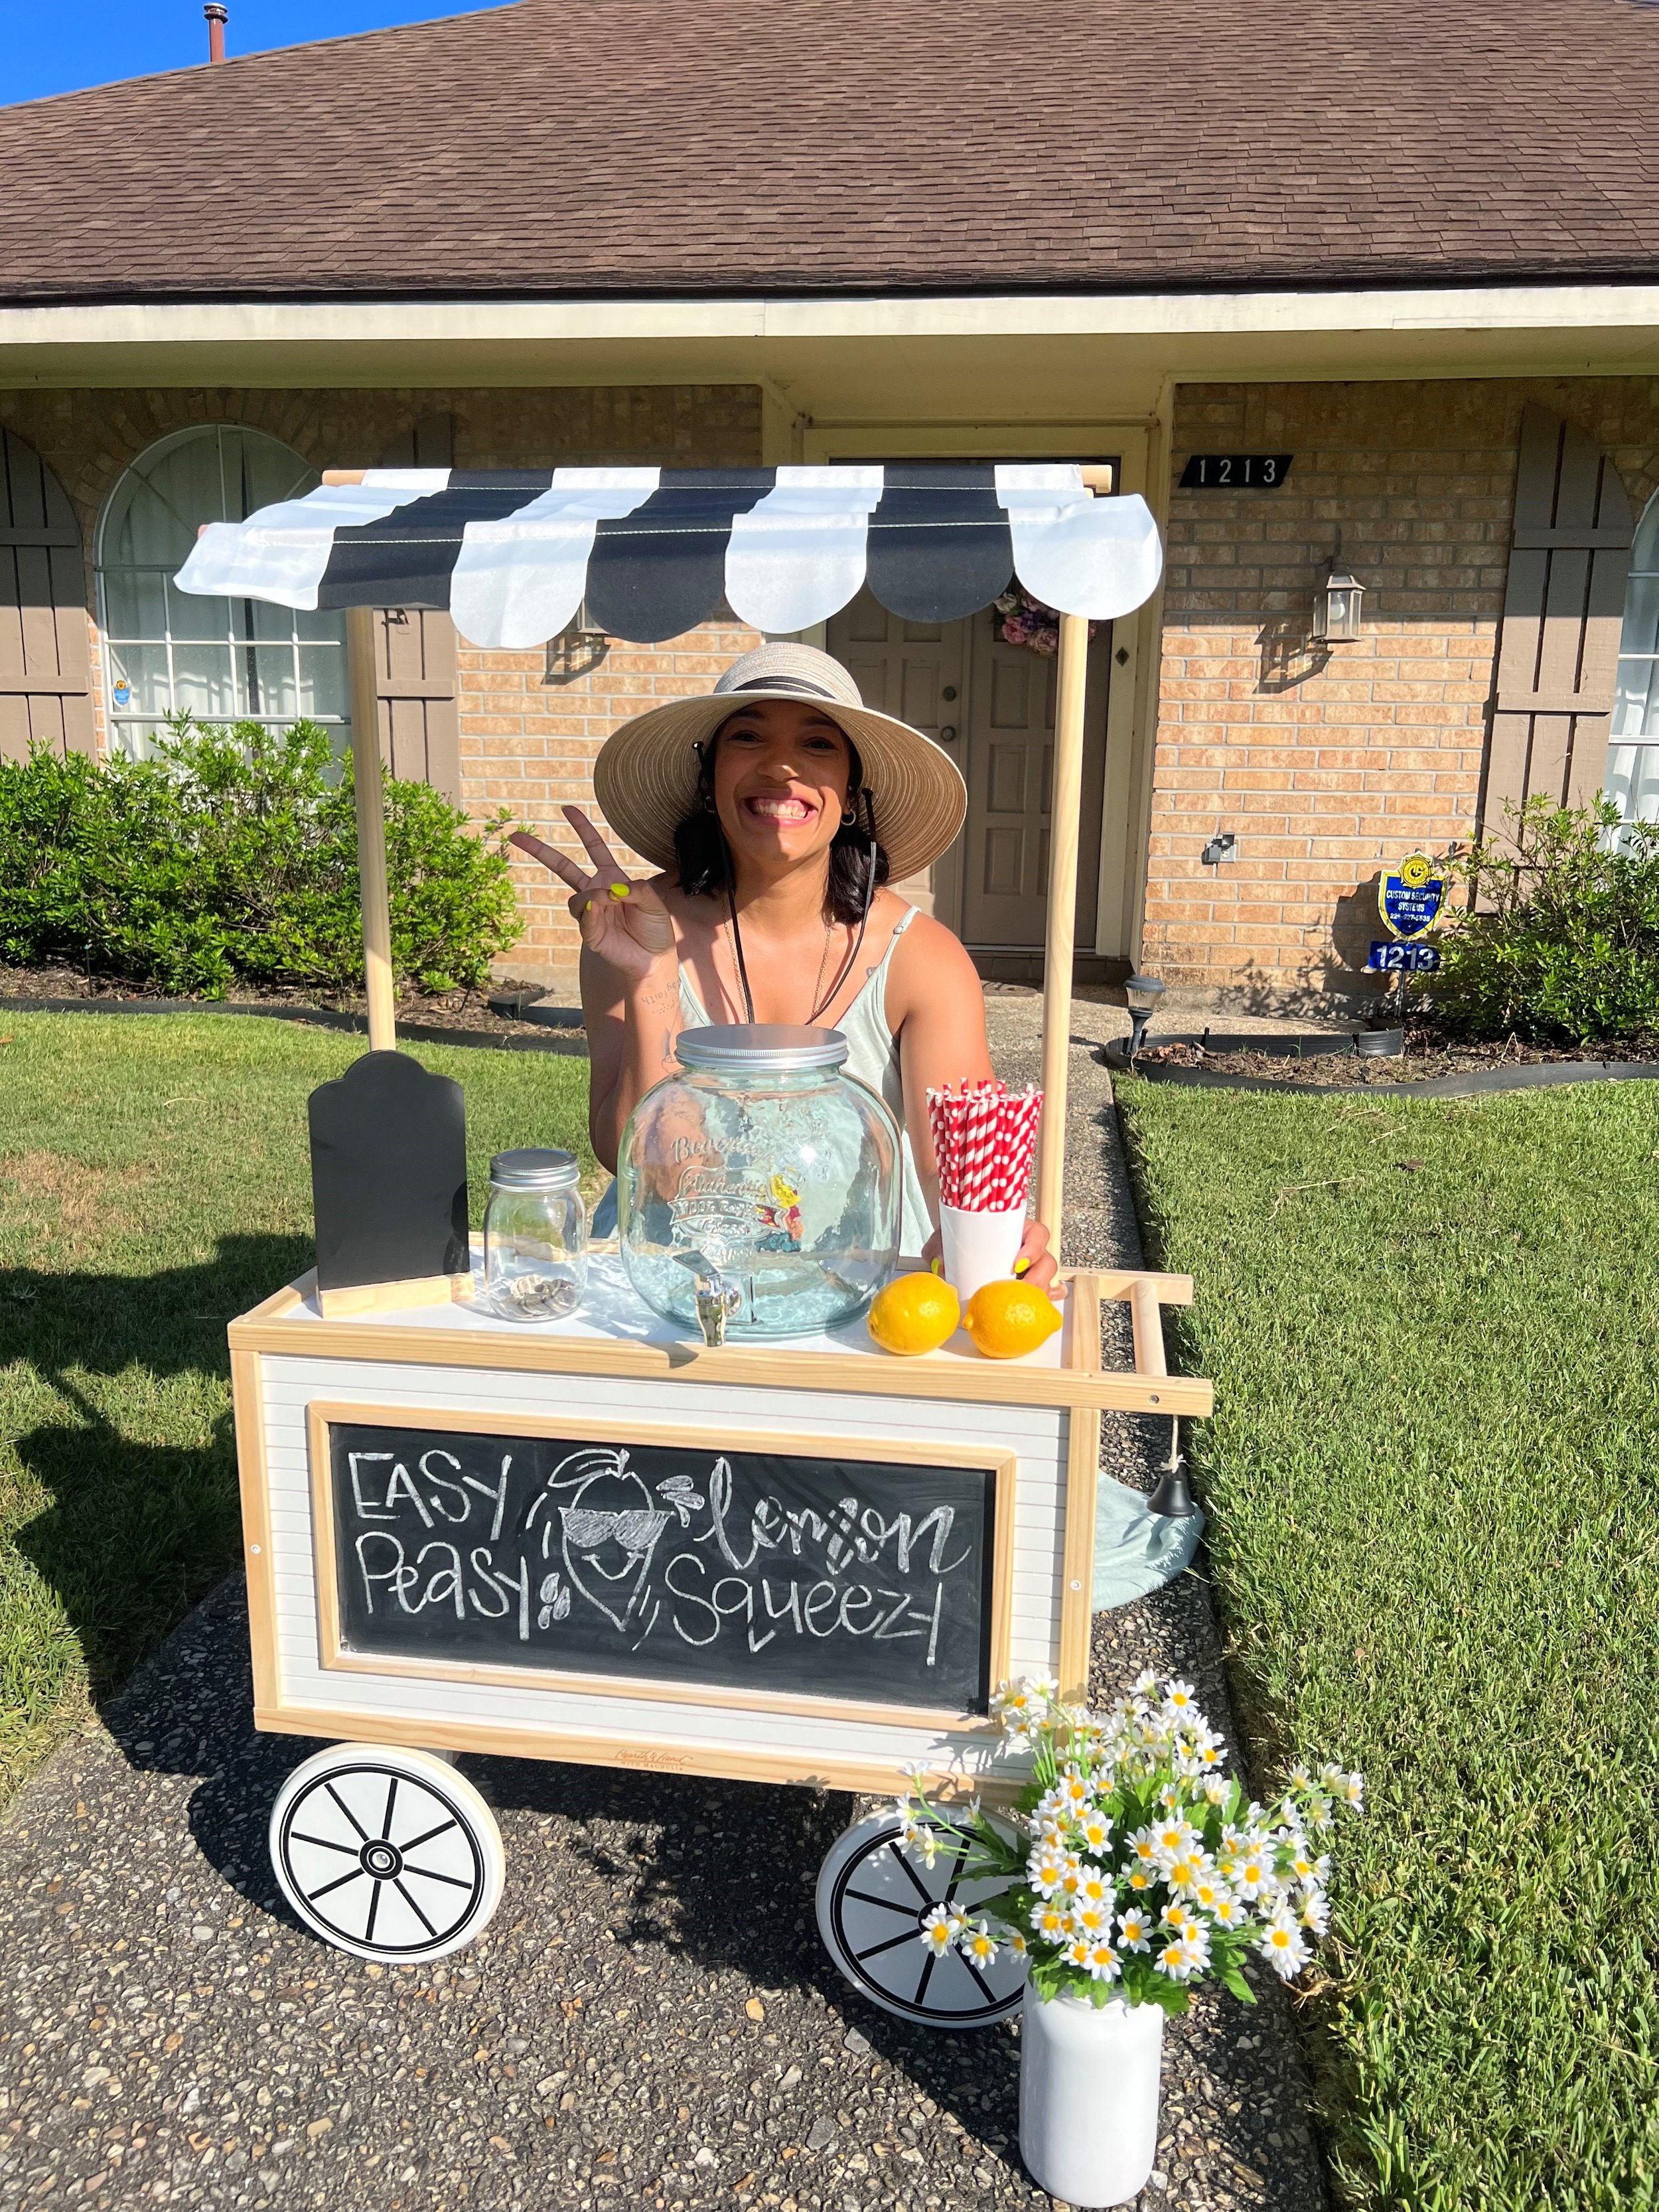  For the second day of filming, 4thFLR’s Victoria Armstrong had the set looking picture perfect. A special shout out goes to Leilani Armstrong of  Cayenne Rouge  for donating event rentals to the shoot. 